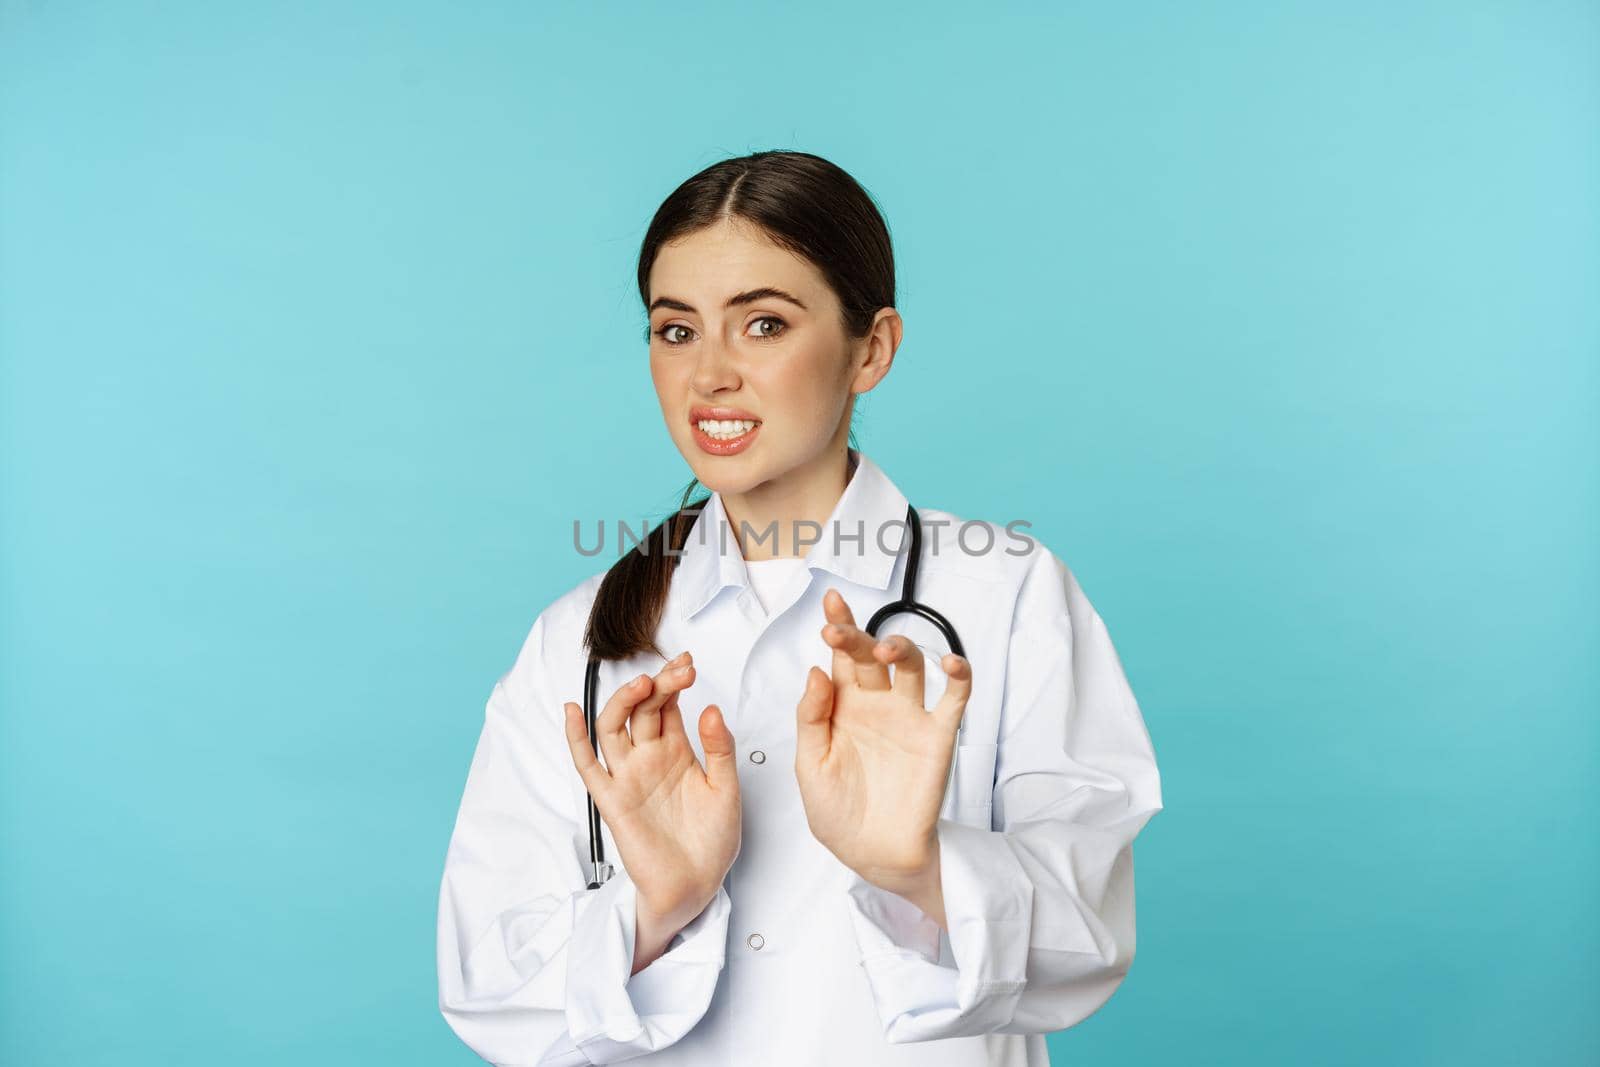 Image of woman doctor cringe, looking with dislike or aversion, rejecting, saying no, stay away, step back from something ugly, standing over torquoise background.